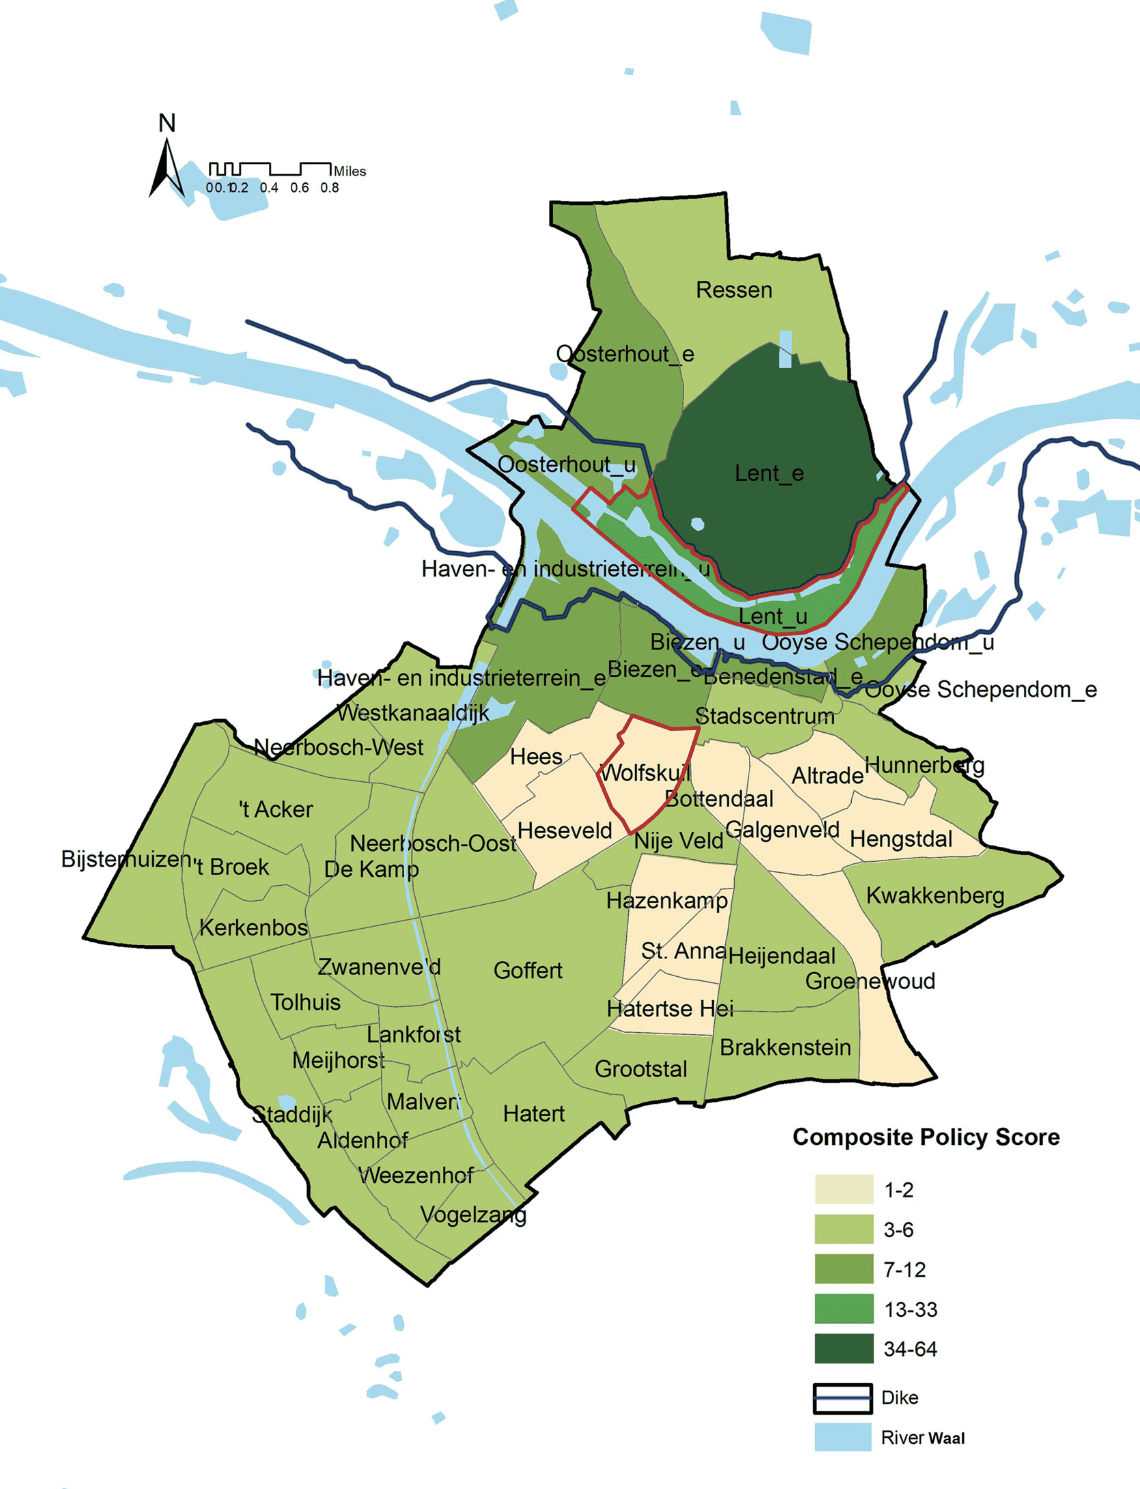 Figure 1: Composite policy scores in neighborhoods of 14 plans collected at national, provincial, and local levels in the city of Nijmegen.